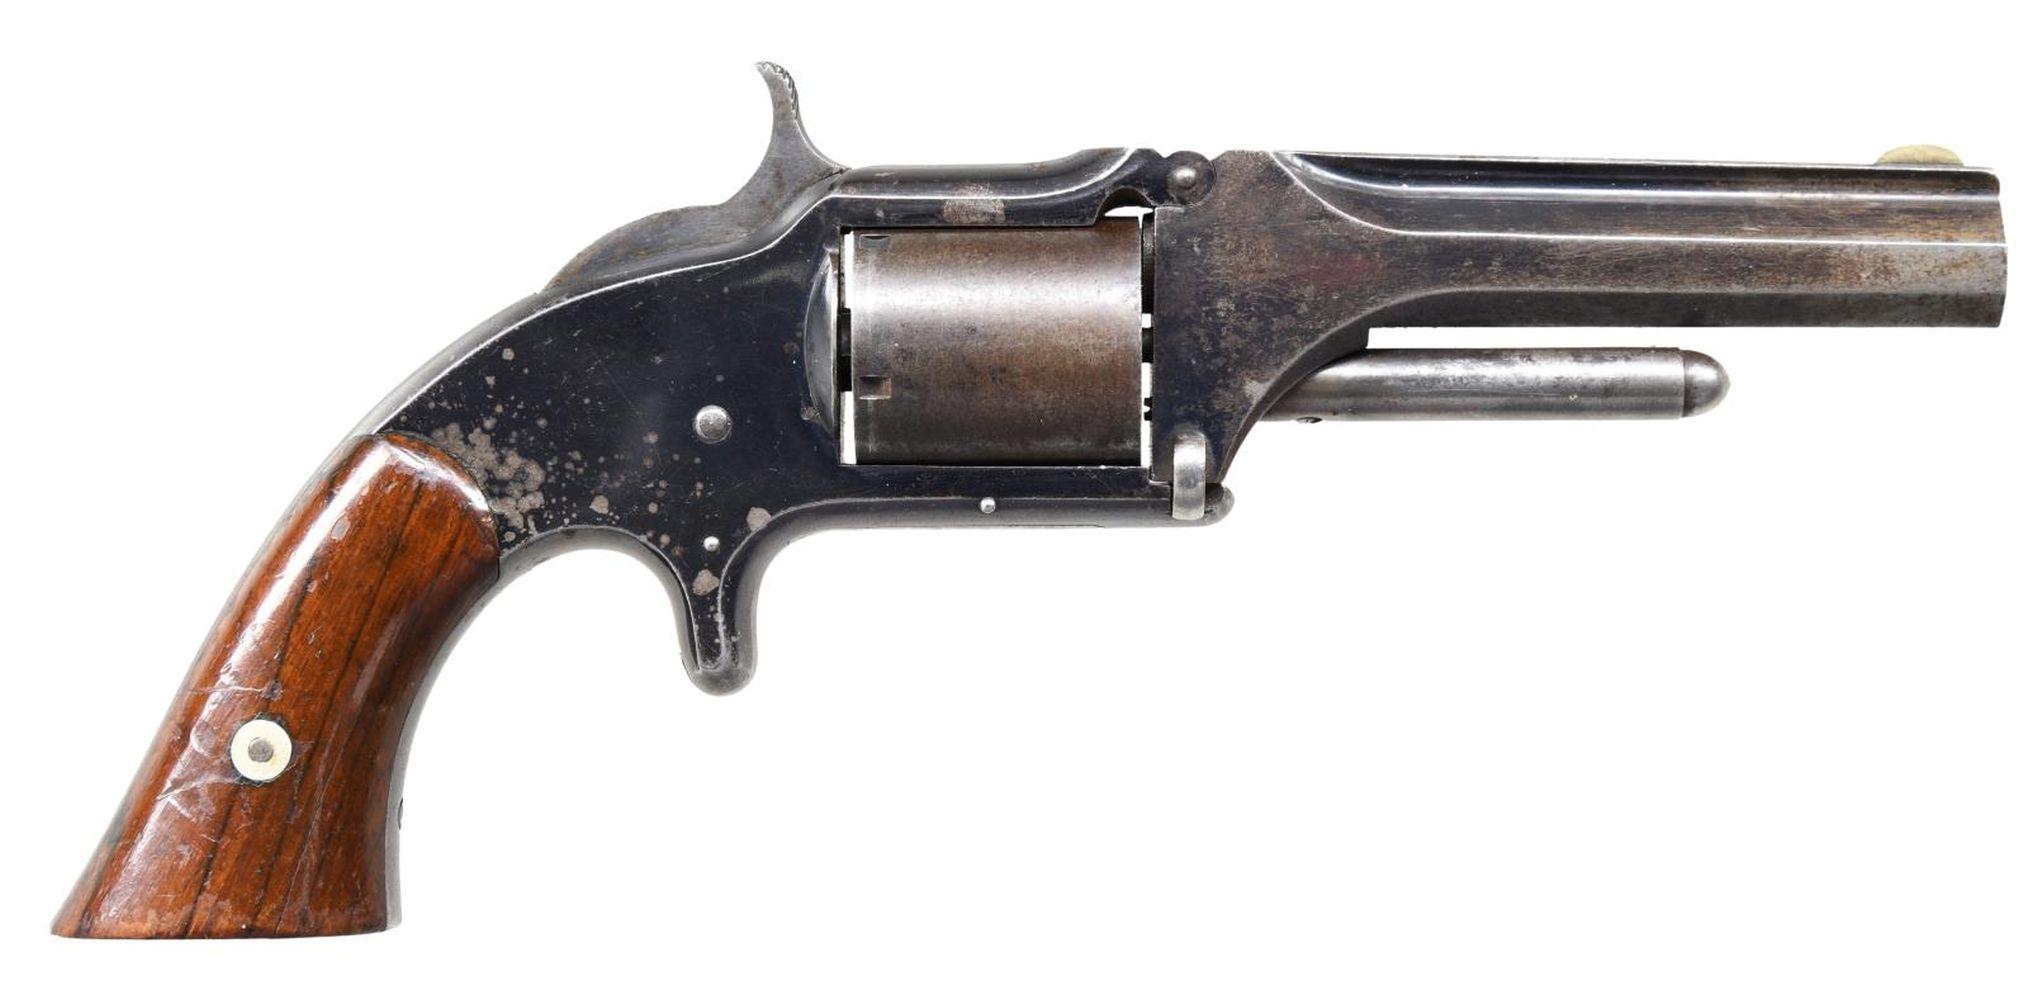 SMITH & WESSON NO 1-1/2 FIRST ISSUE SA REVOLVER.